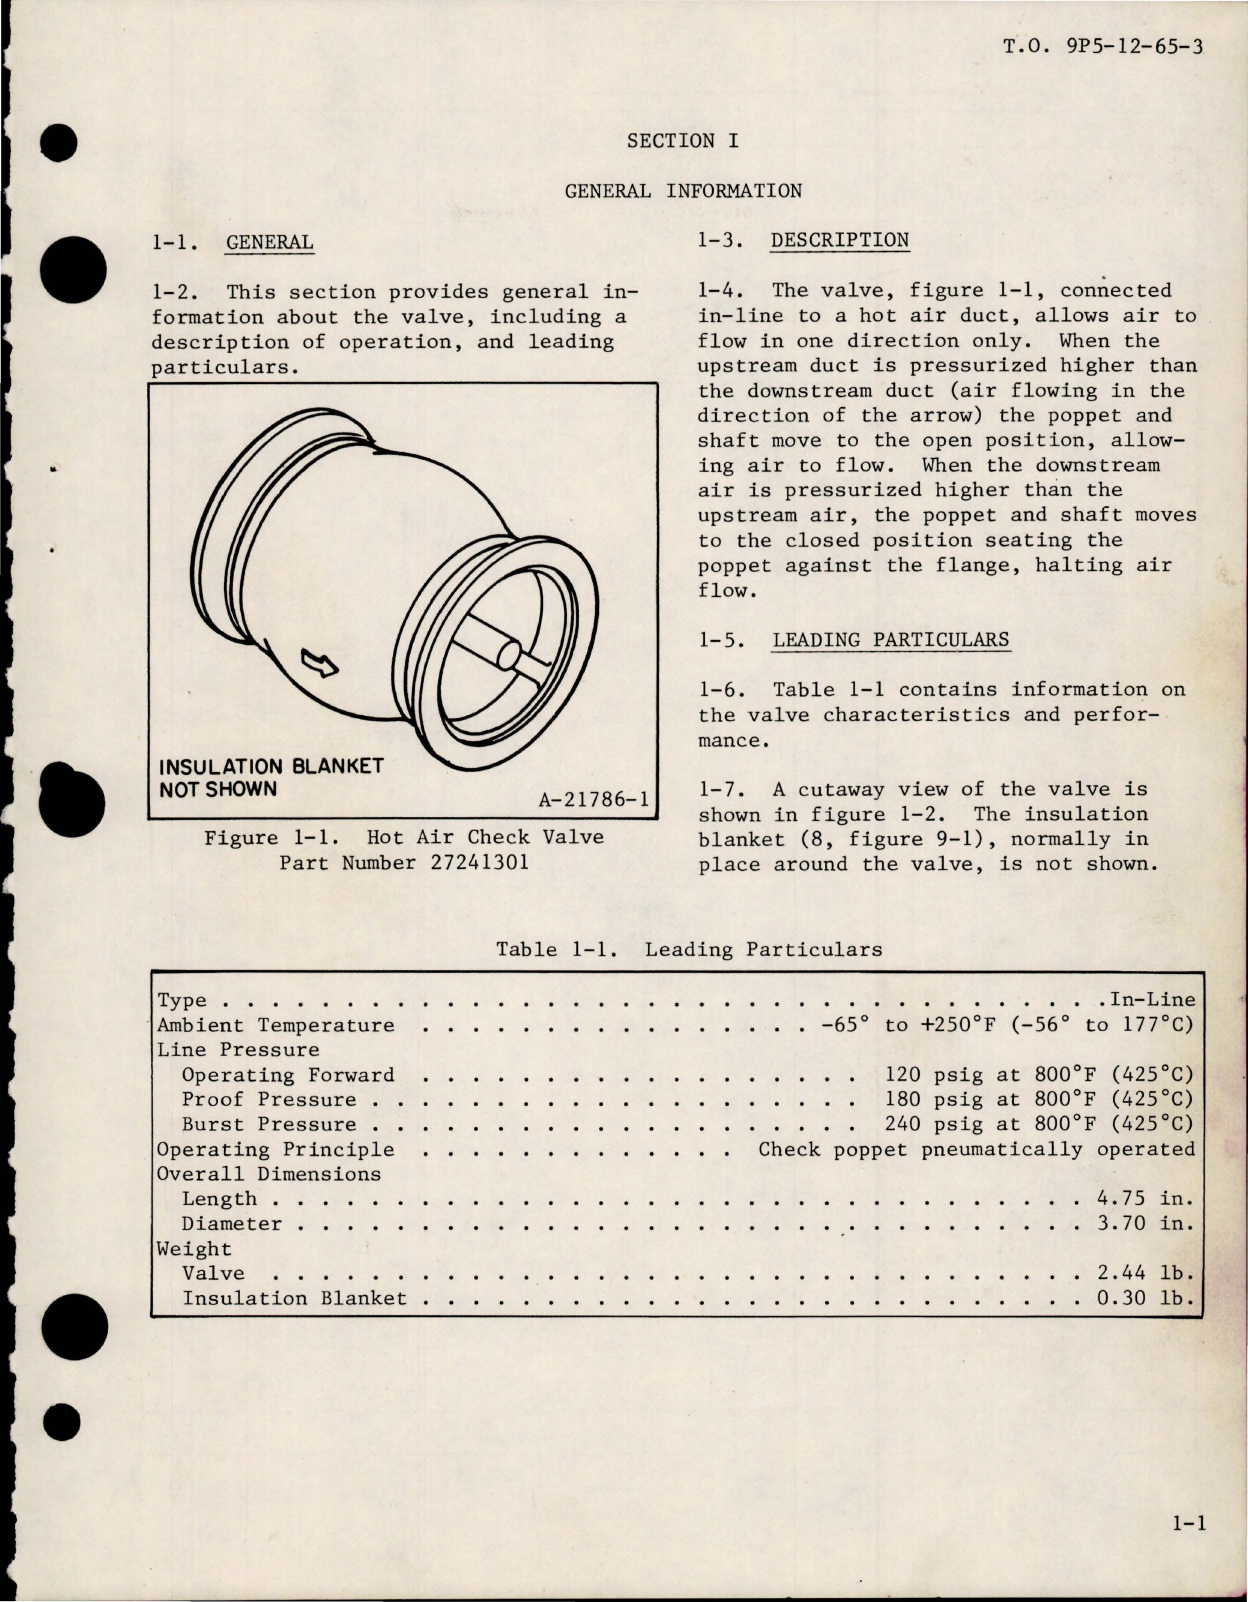 Sample page 7 from AirCorps Library document: Overhaul Instructions with Illustrated Parts Breakdown for Hot Air Check Valve - Part 27241301